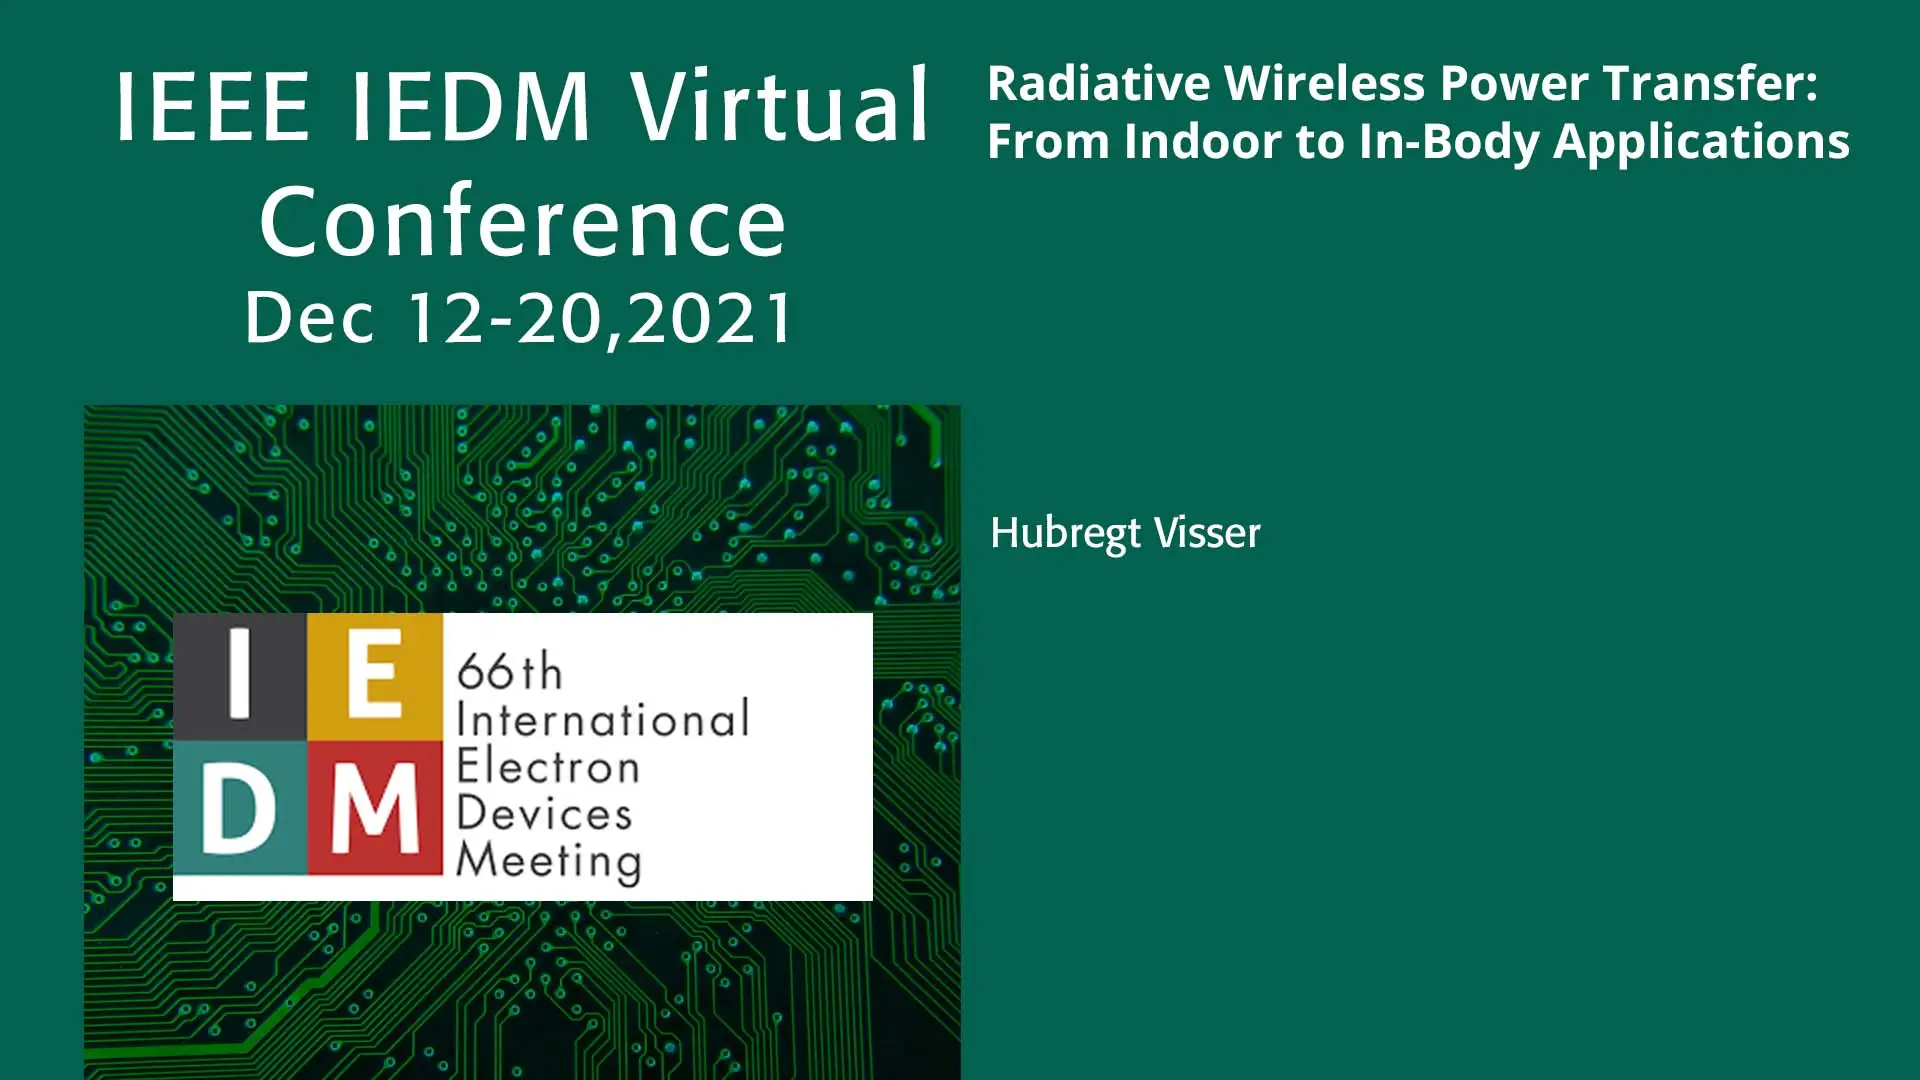 Radiative Wireless Power Transfer: From Indoor to In-Body Applications